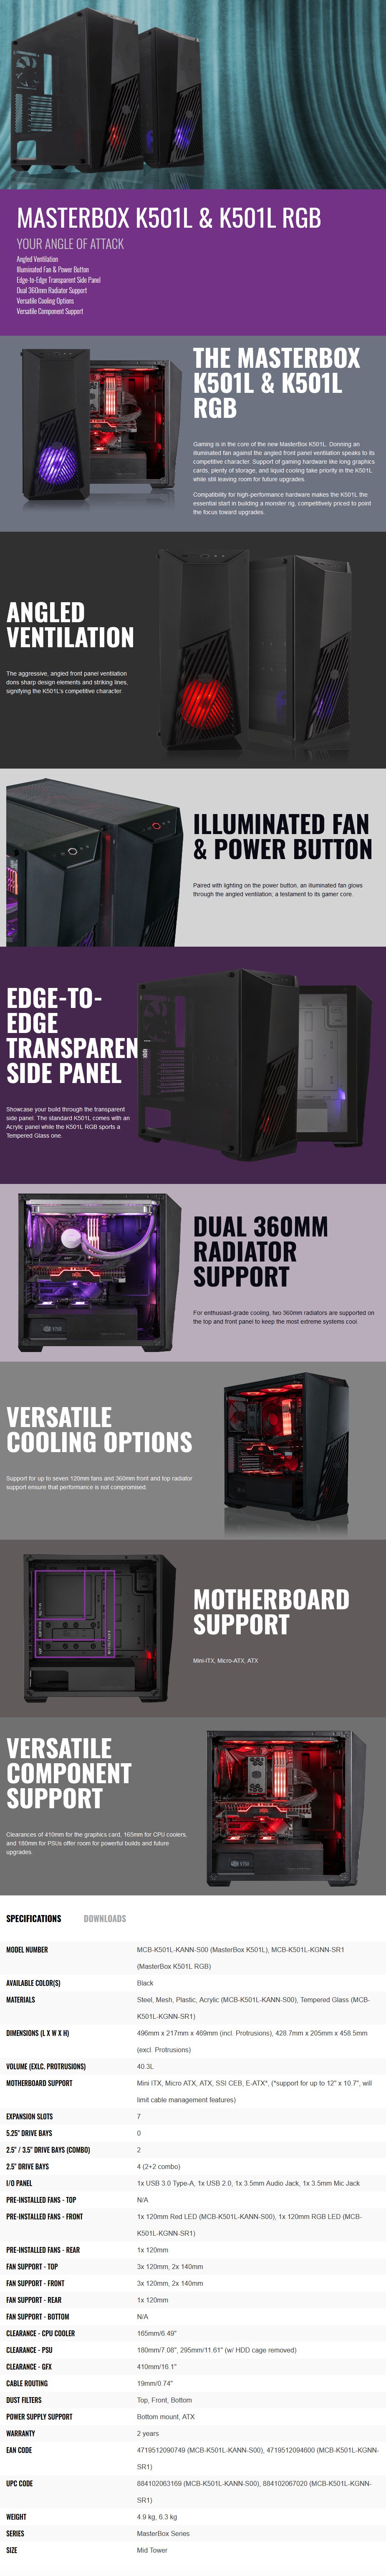 Cooler Master MasterBox K501L RGB Tempered Glass Mid-Tower ATX Case - Black - Overview 1